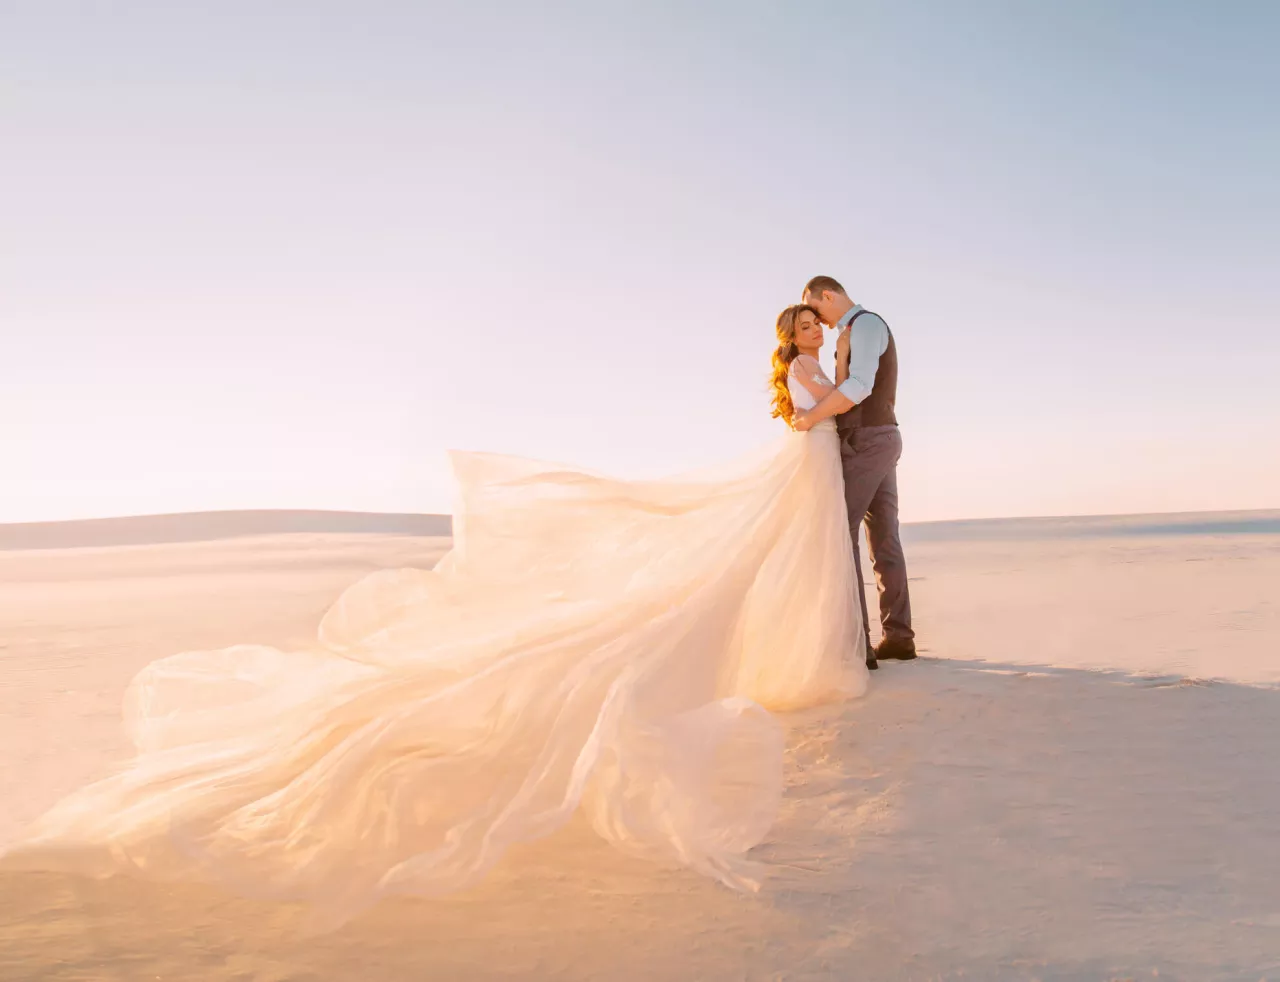 couple getting married in desert